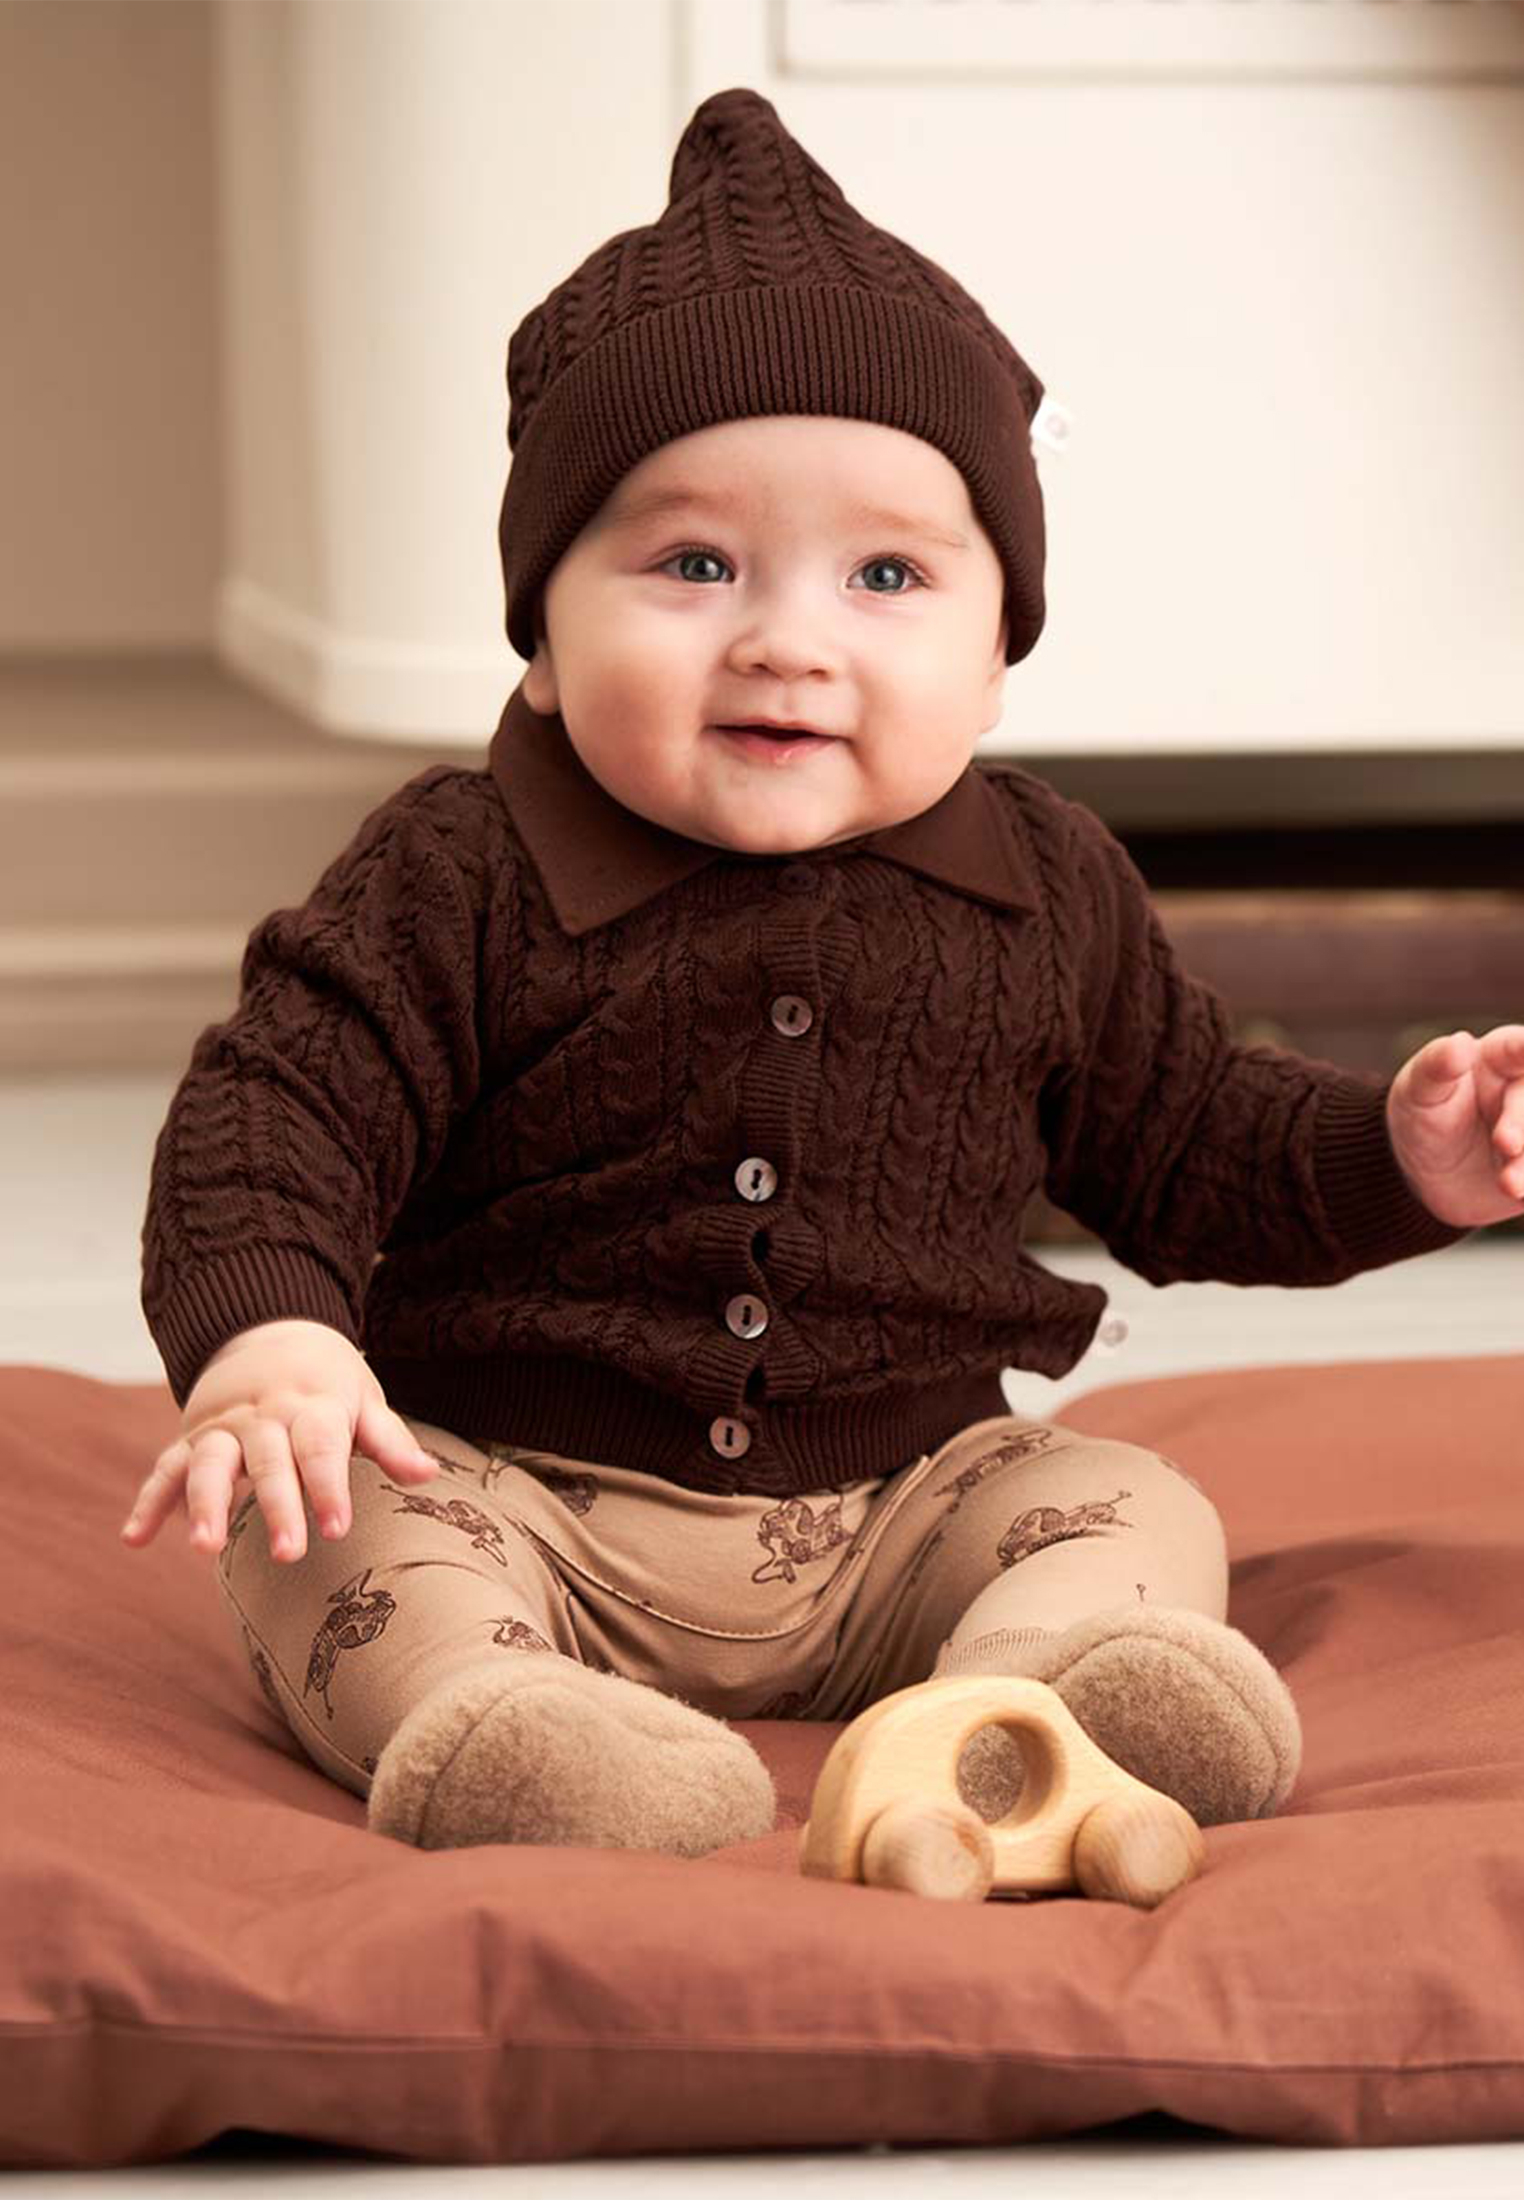 MAMA.LICIOUS Knitted baby-cardigan  -Coffee - 1546004100